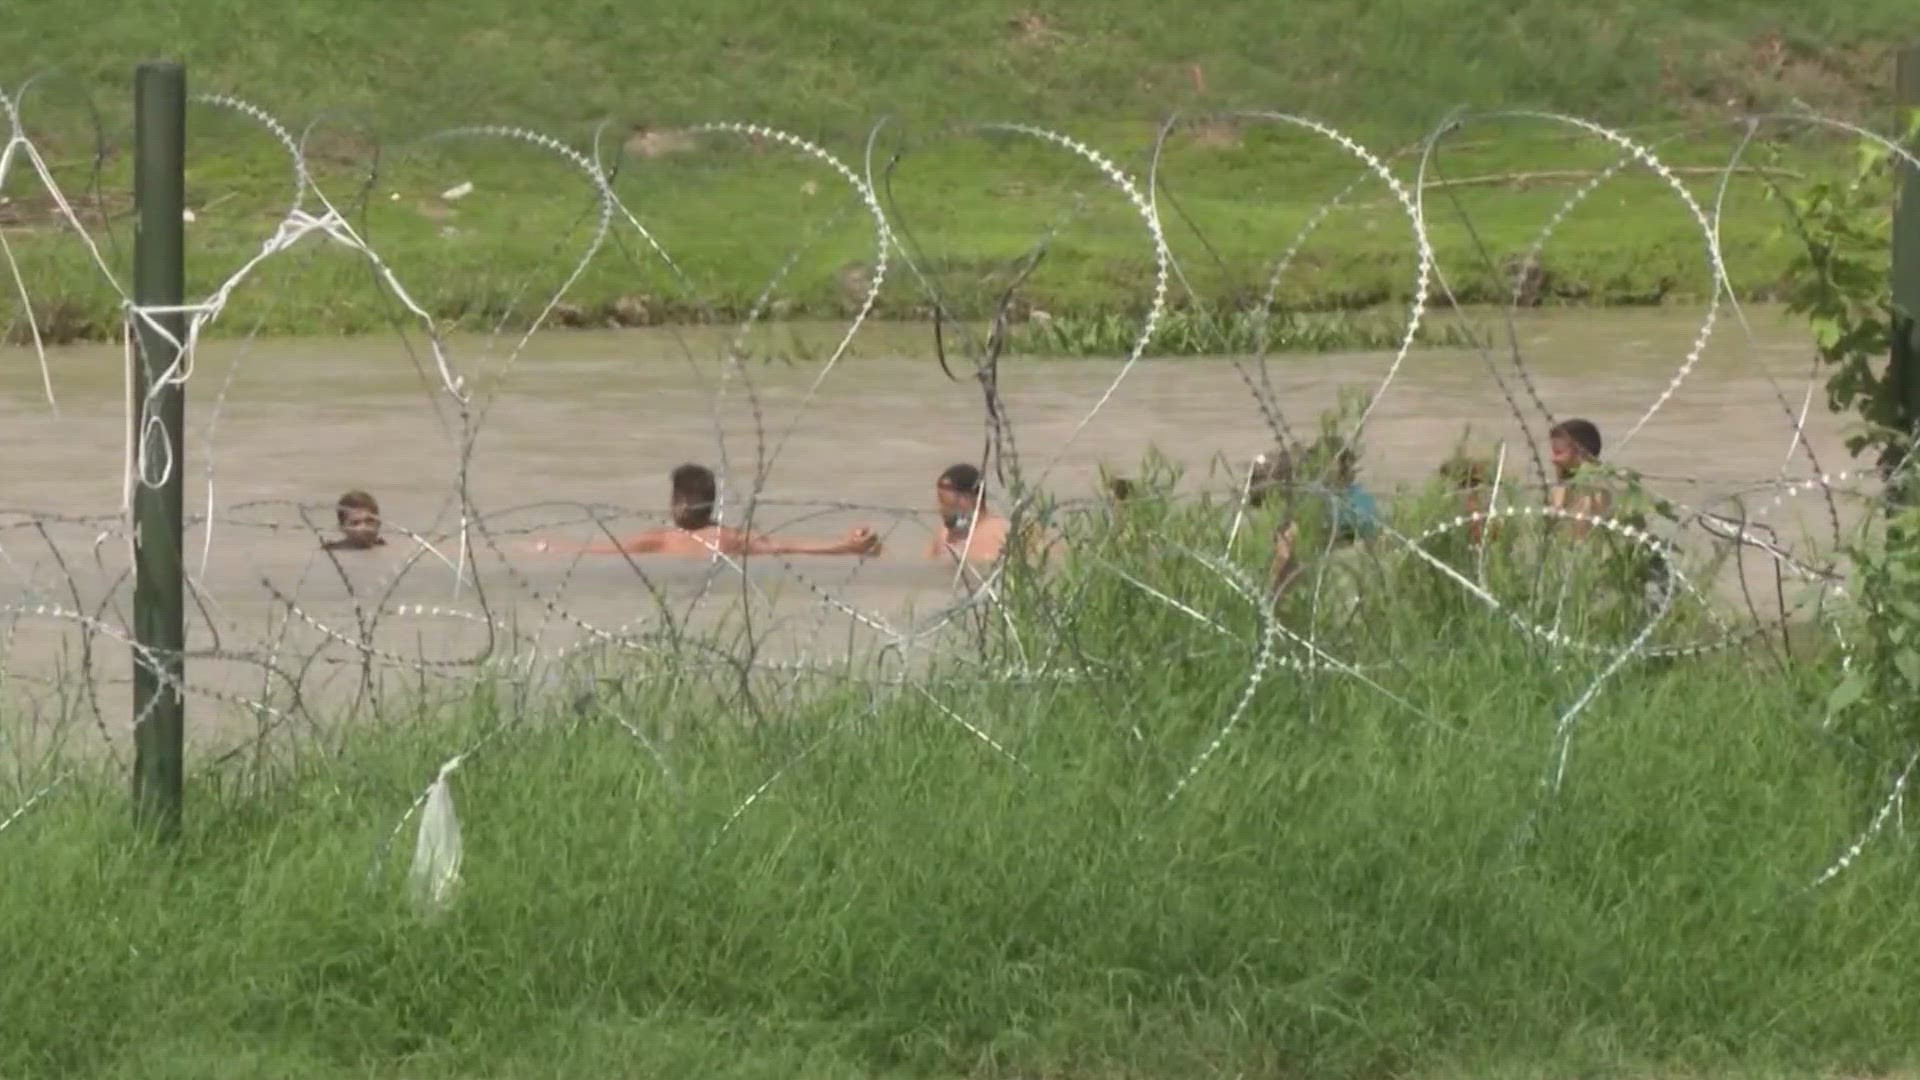 A lower court ruling forced federal agents to stop cutting the concertina wire that the state has installed along roughly 30 miles of the Rio Grande.